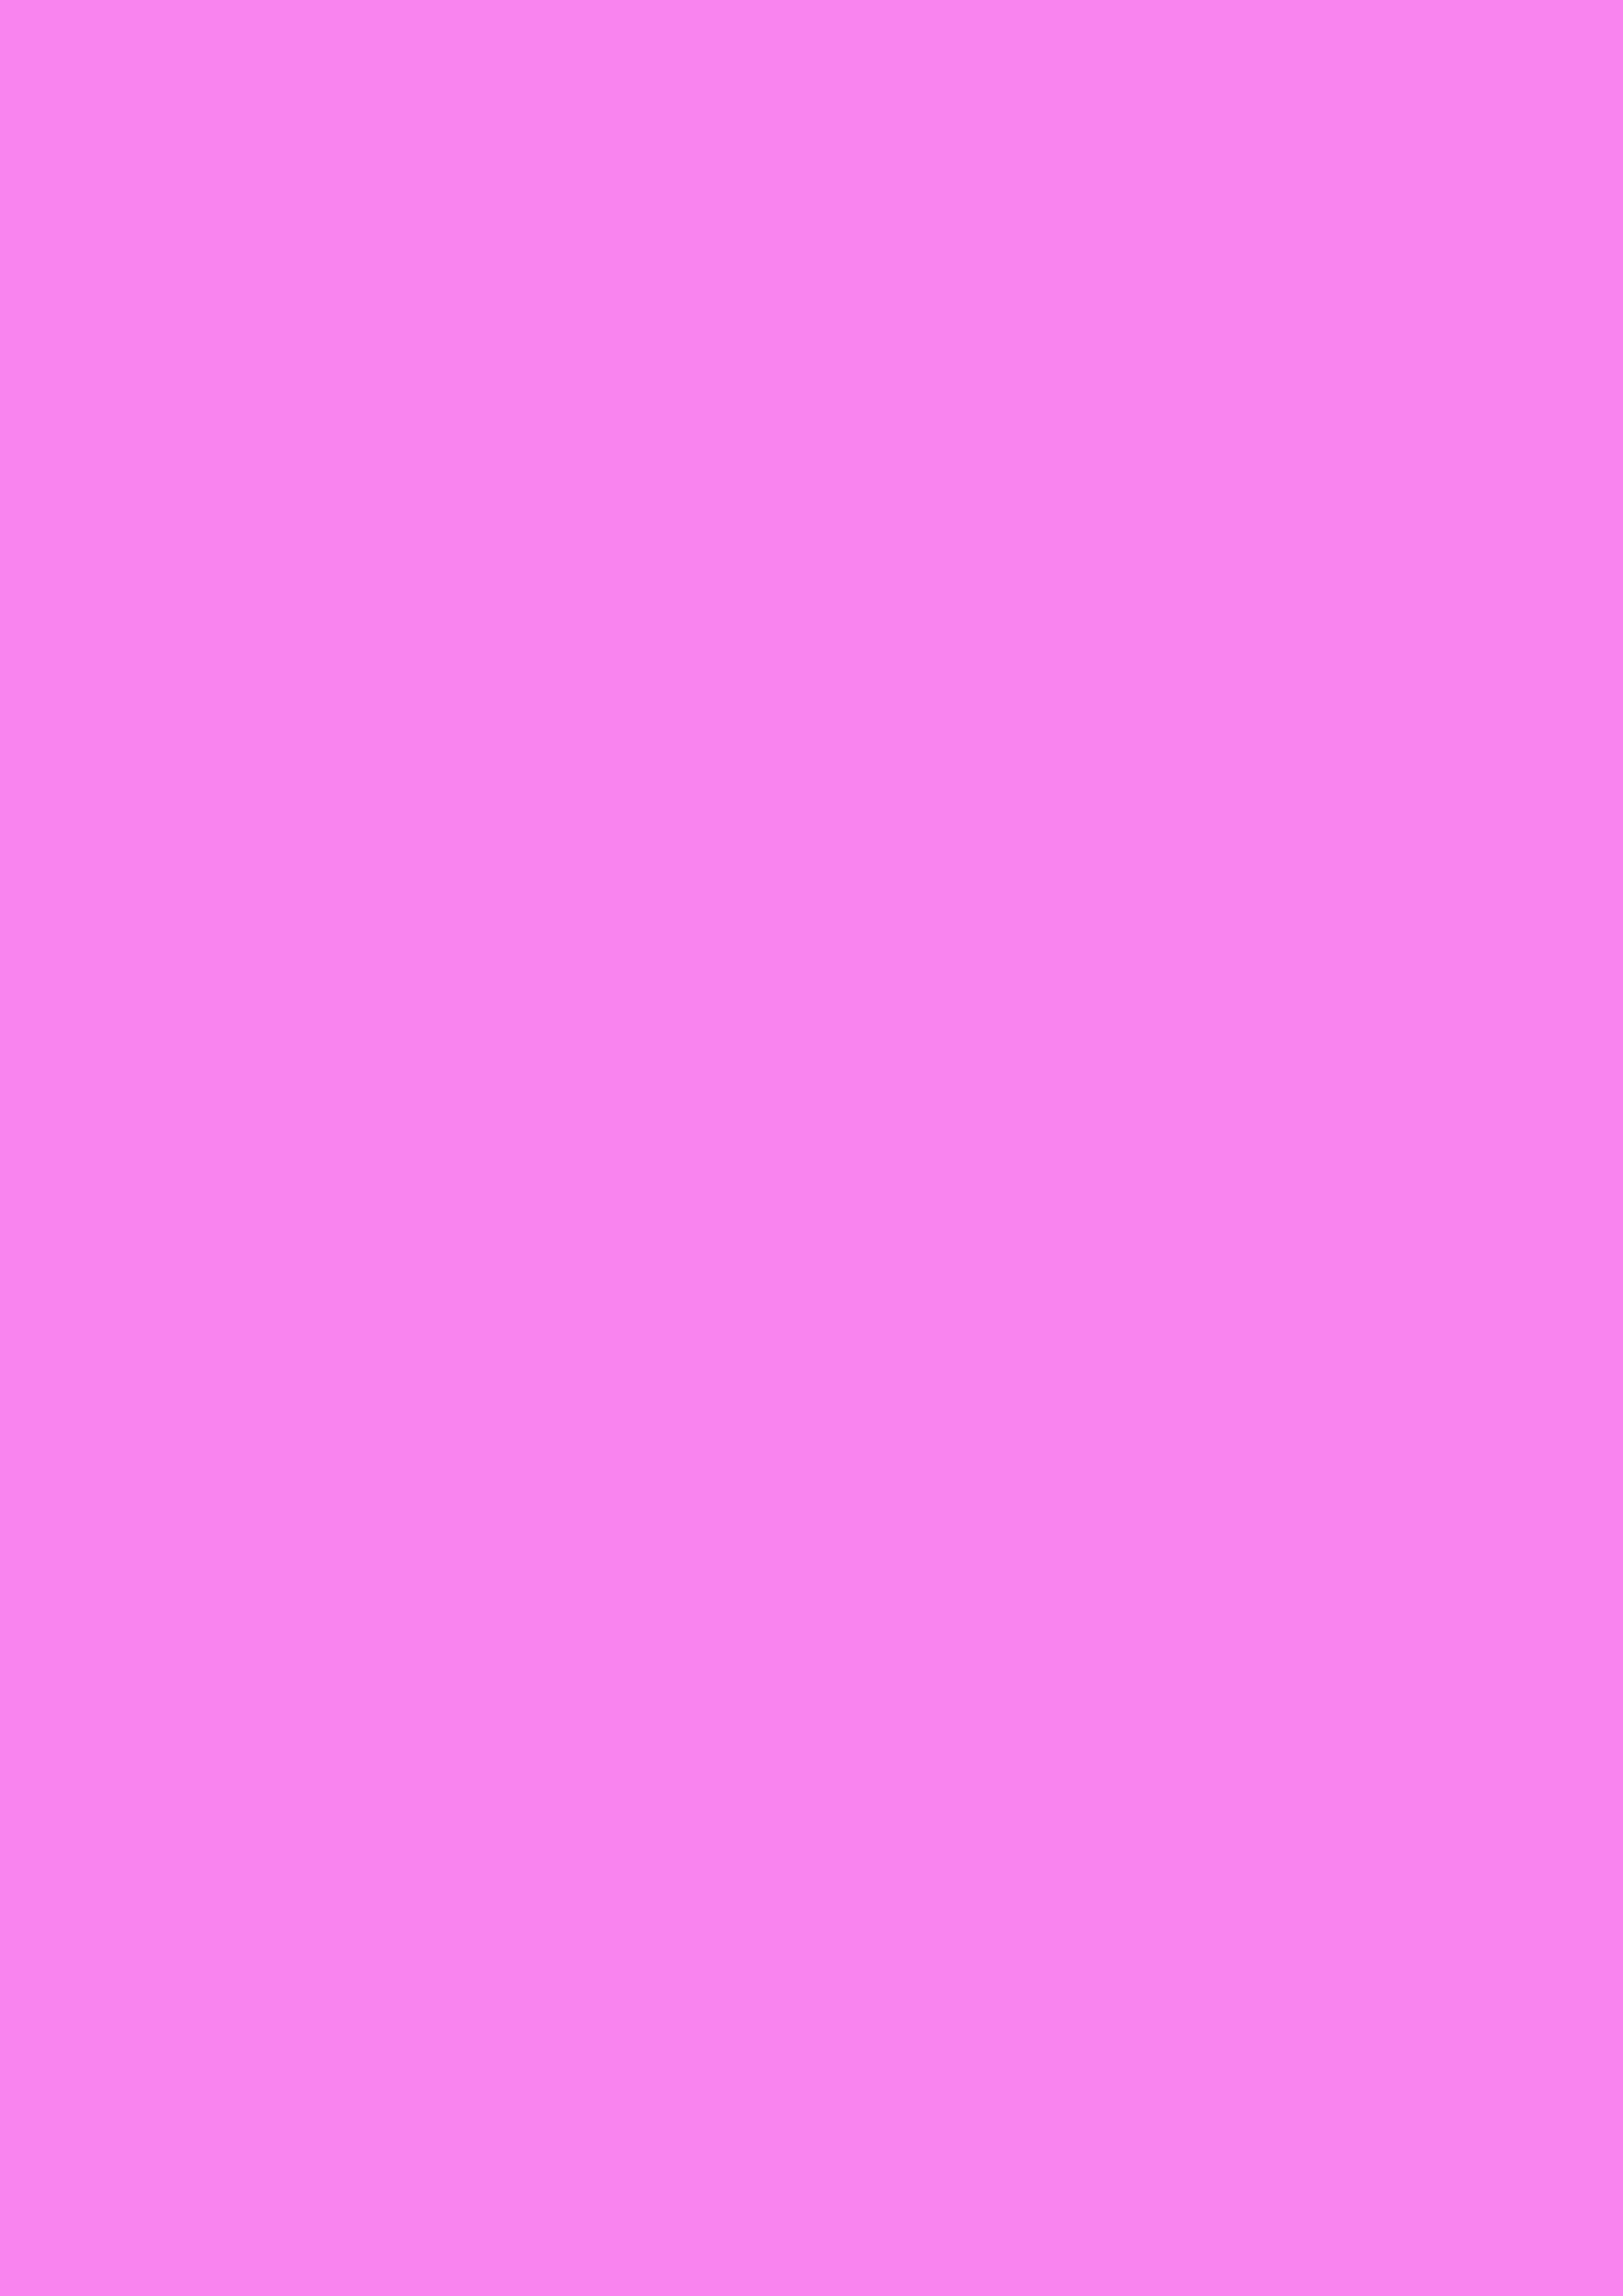 2480x3508 Light Fuchsia Pink Solid Color Background